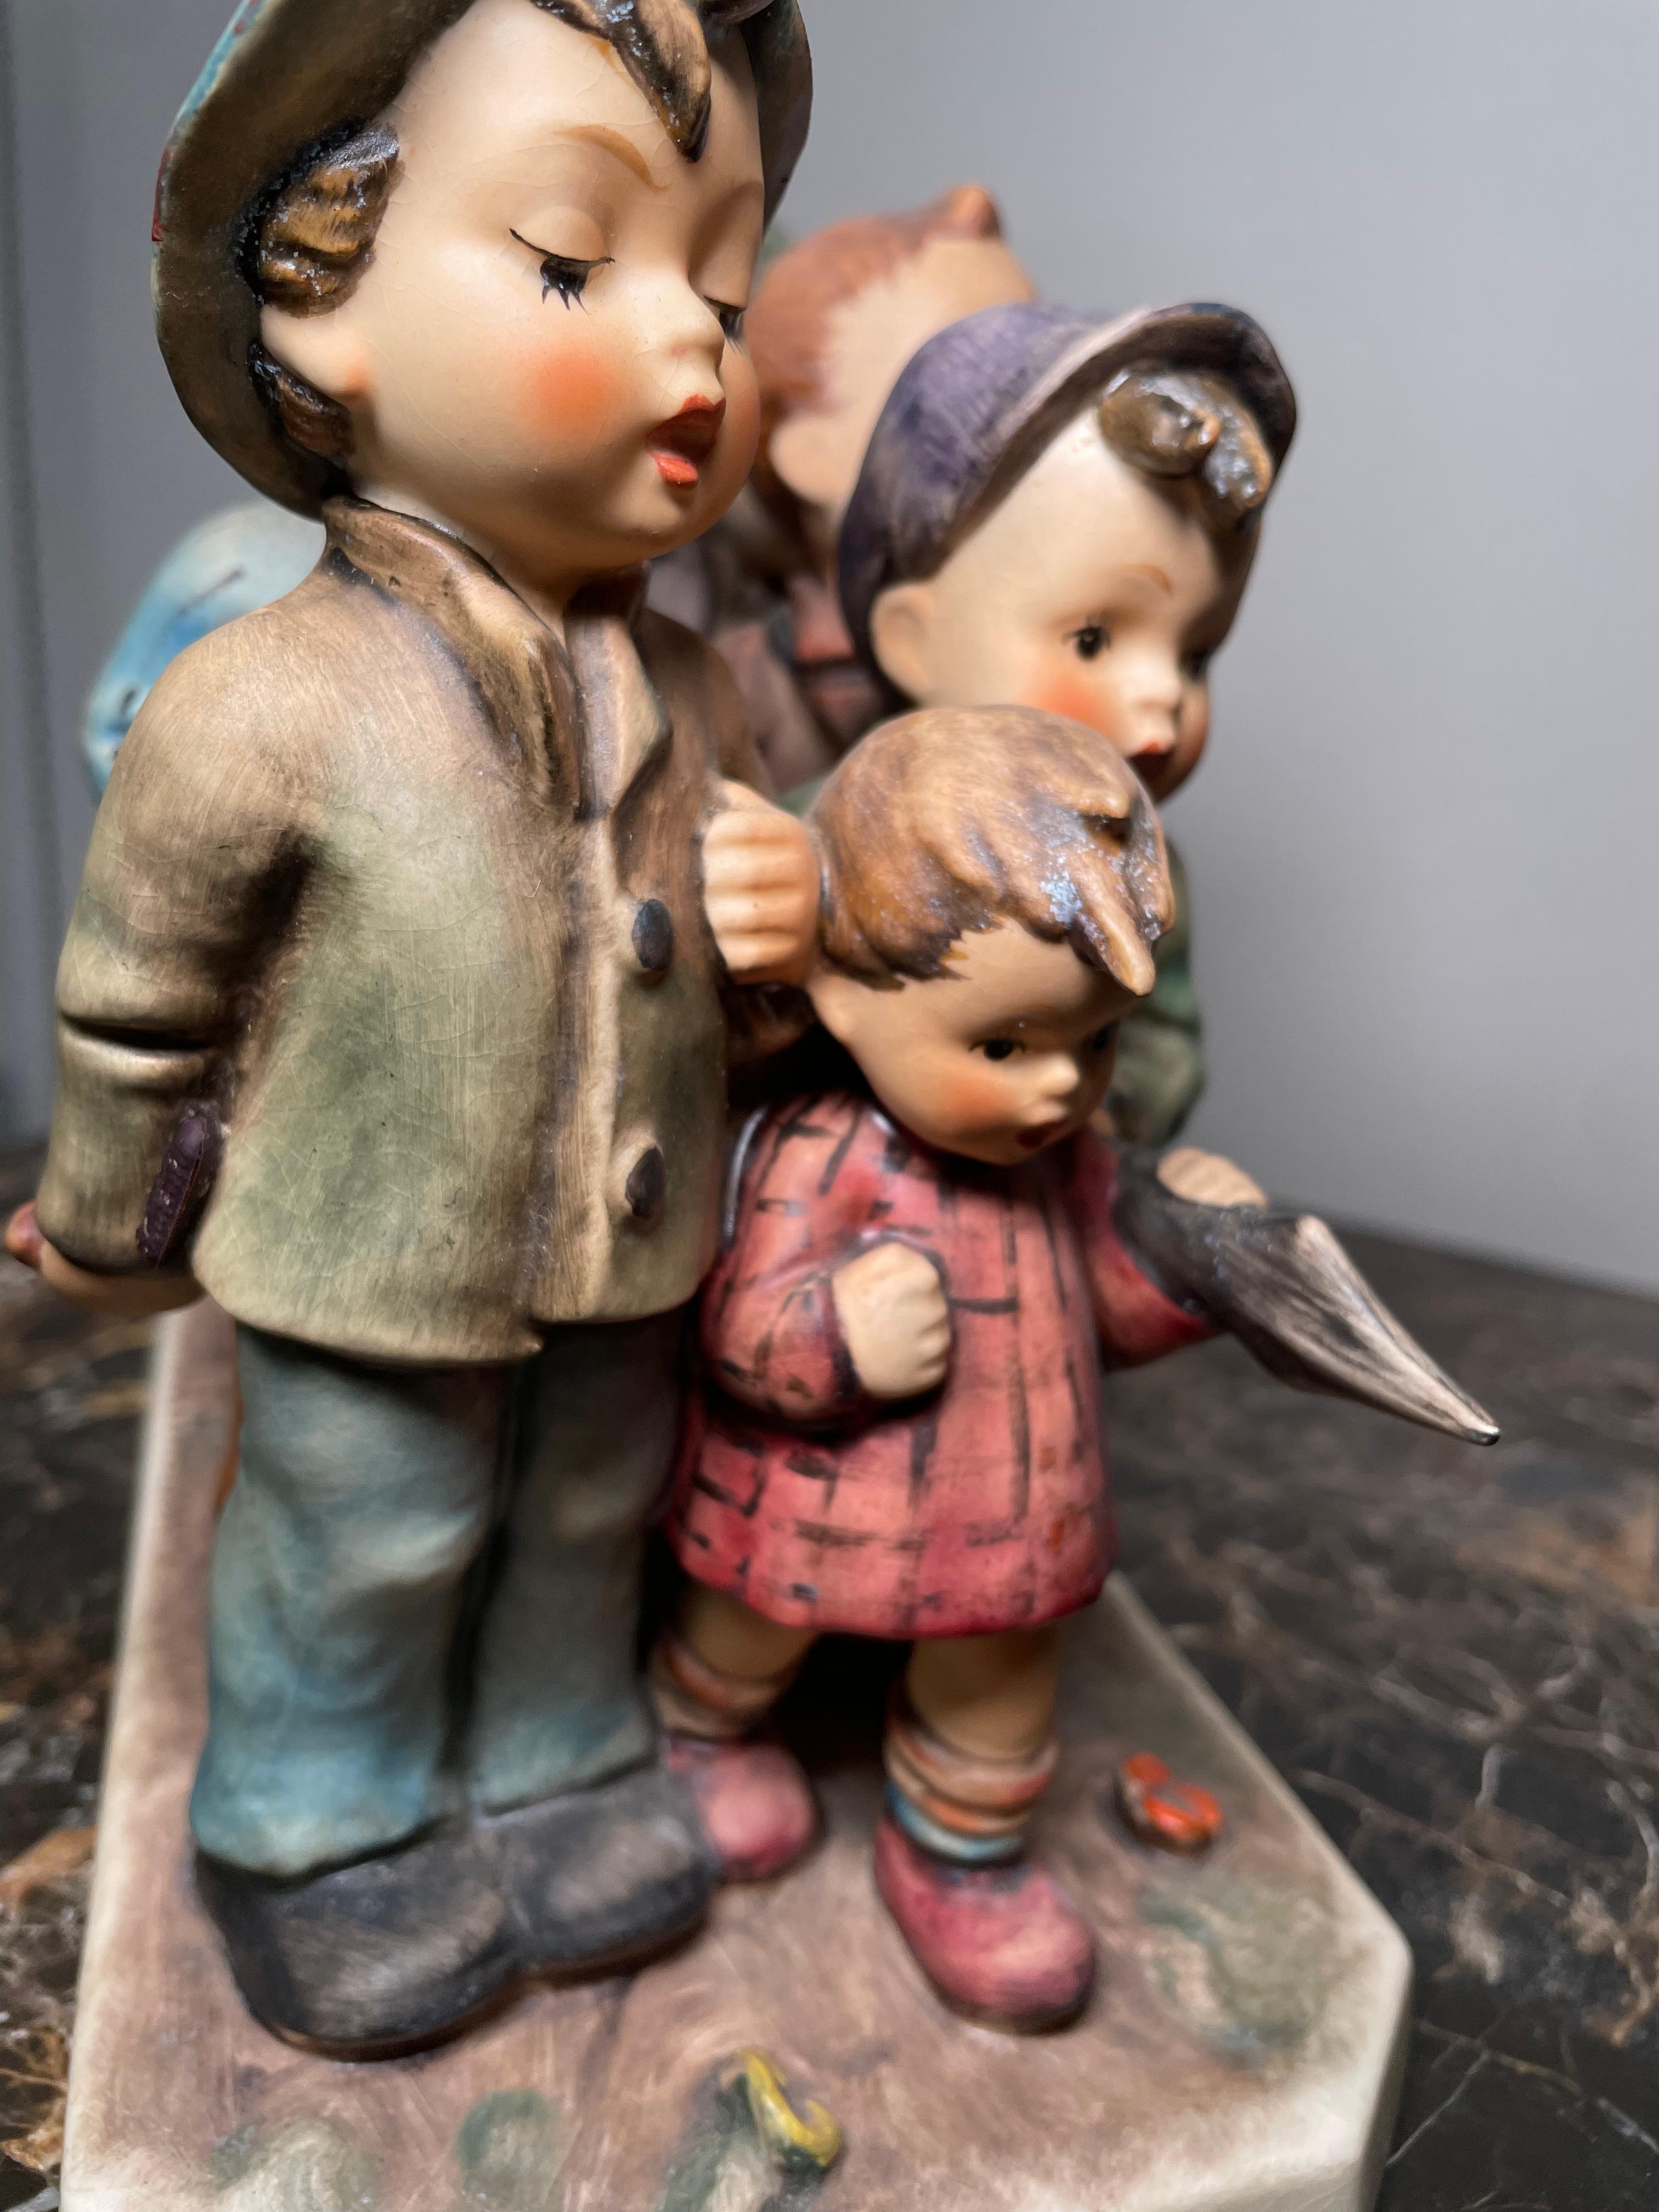 Goebel Company Hummel Porcelain Group Figurines “Adventure Bound” In Good Condition For Sale In Guaynabo, PR